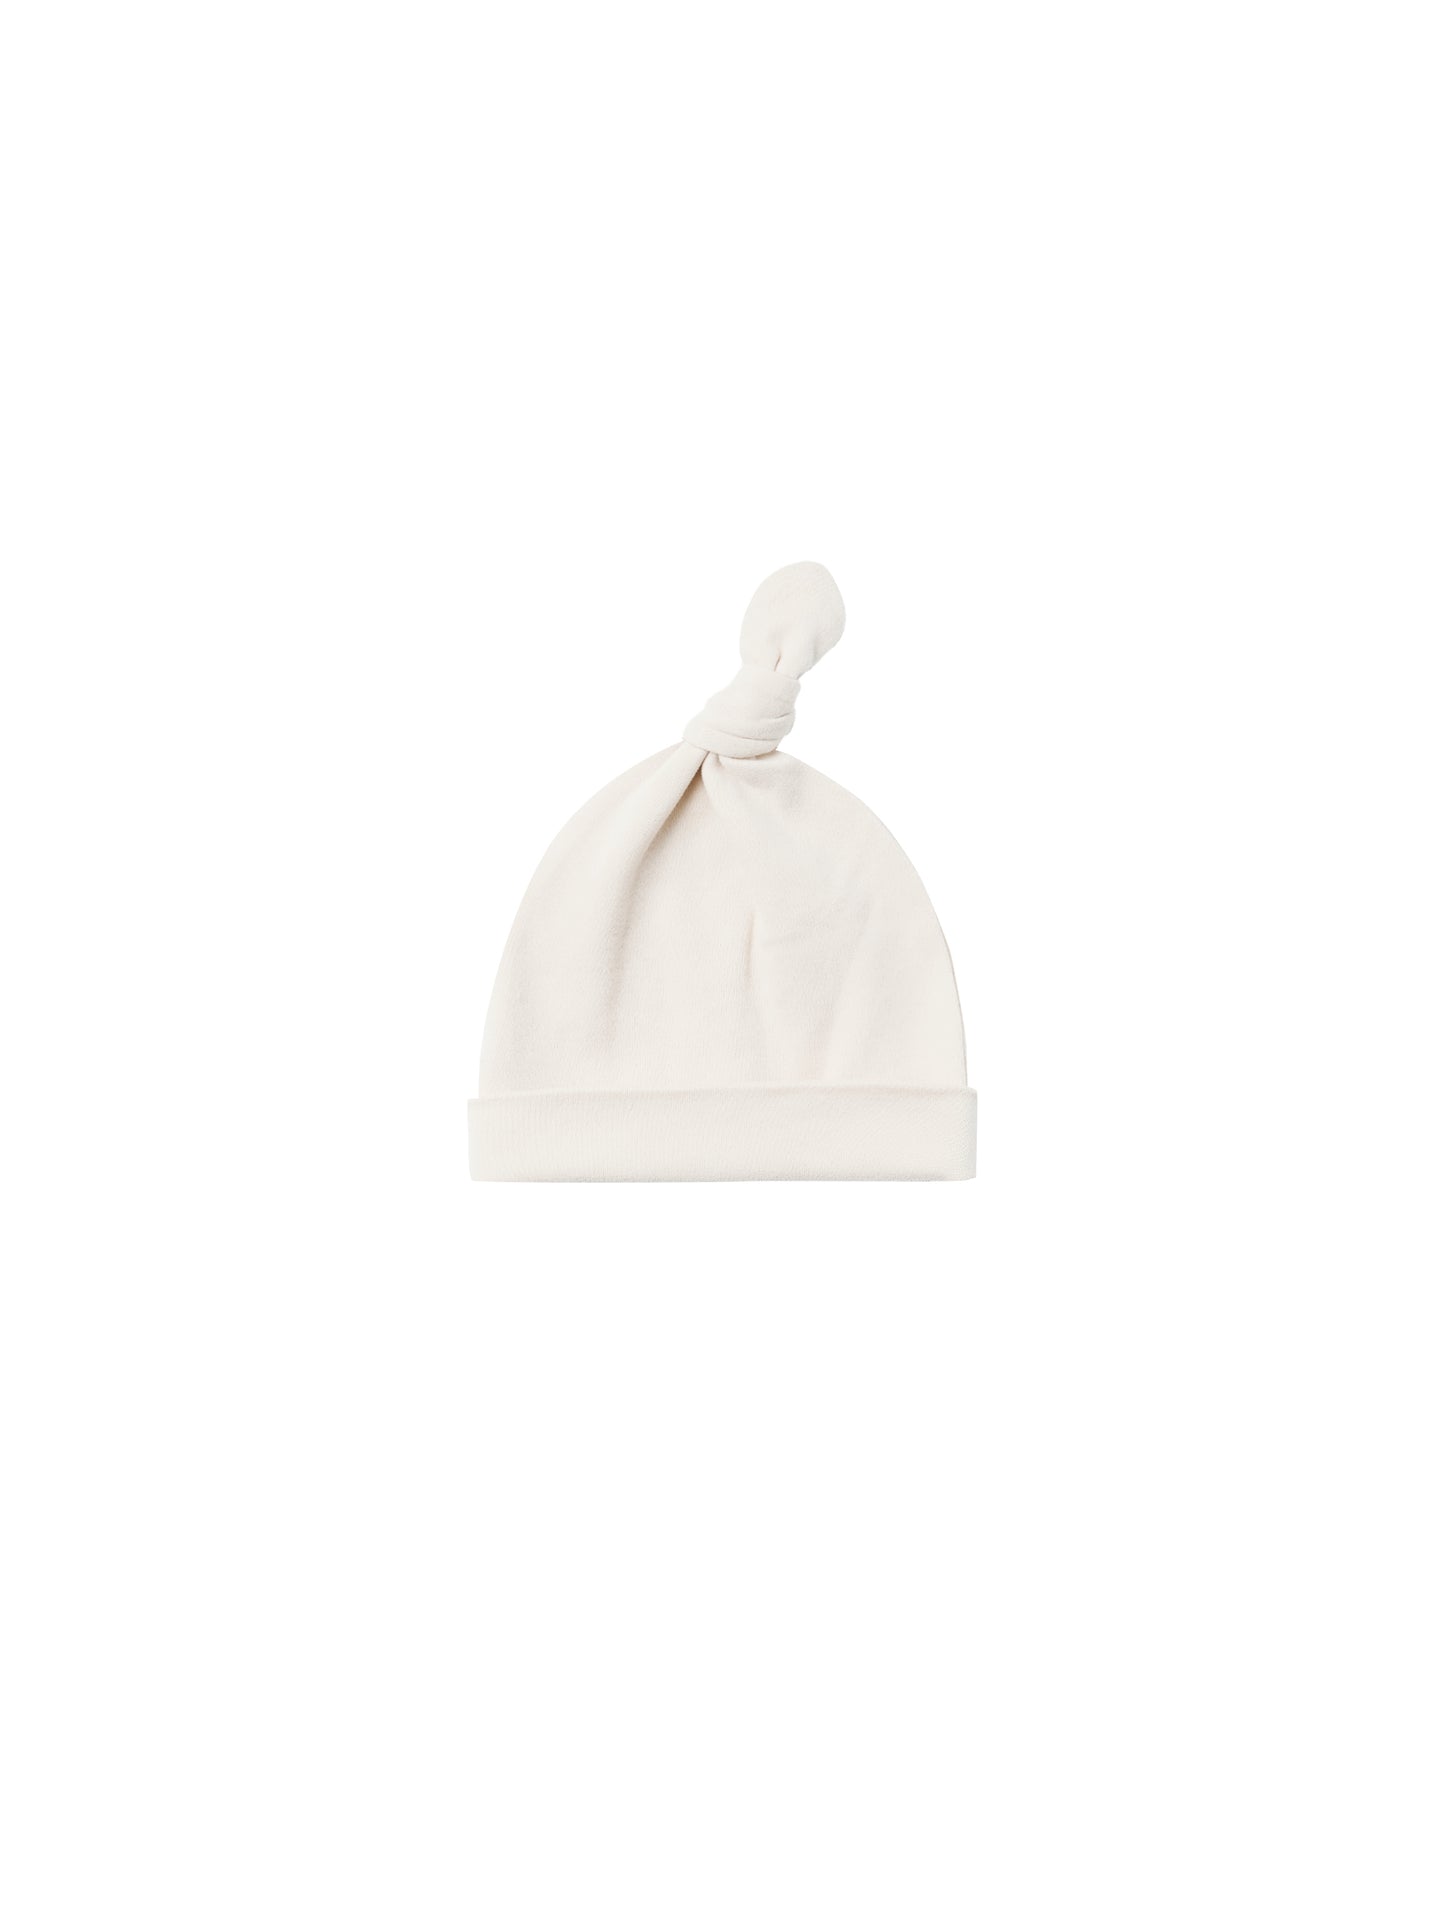 SALE - Quincy Mae Knotted Baby Hat - Multiple Colors Available